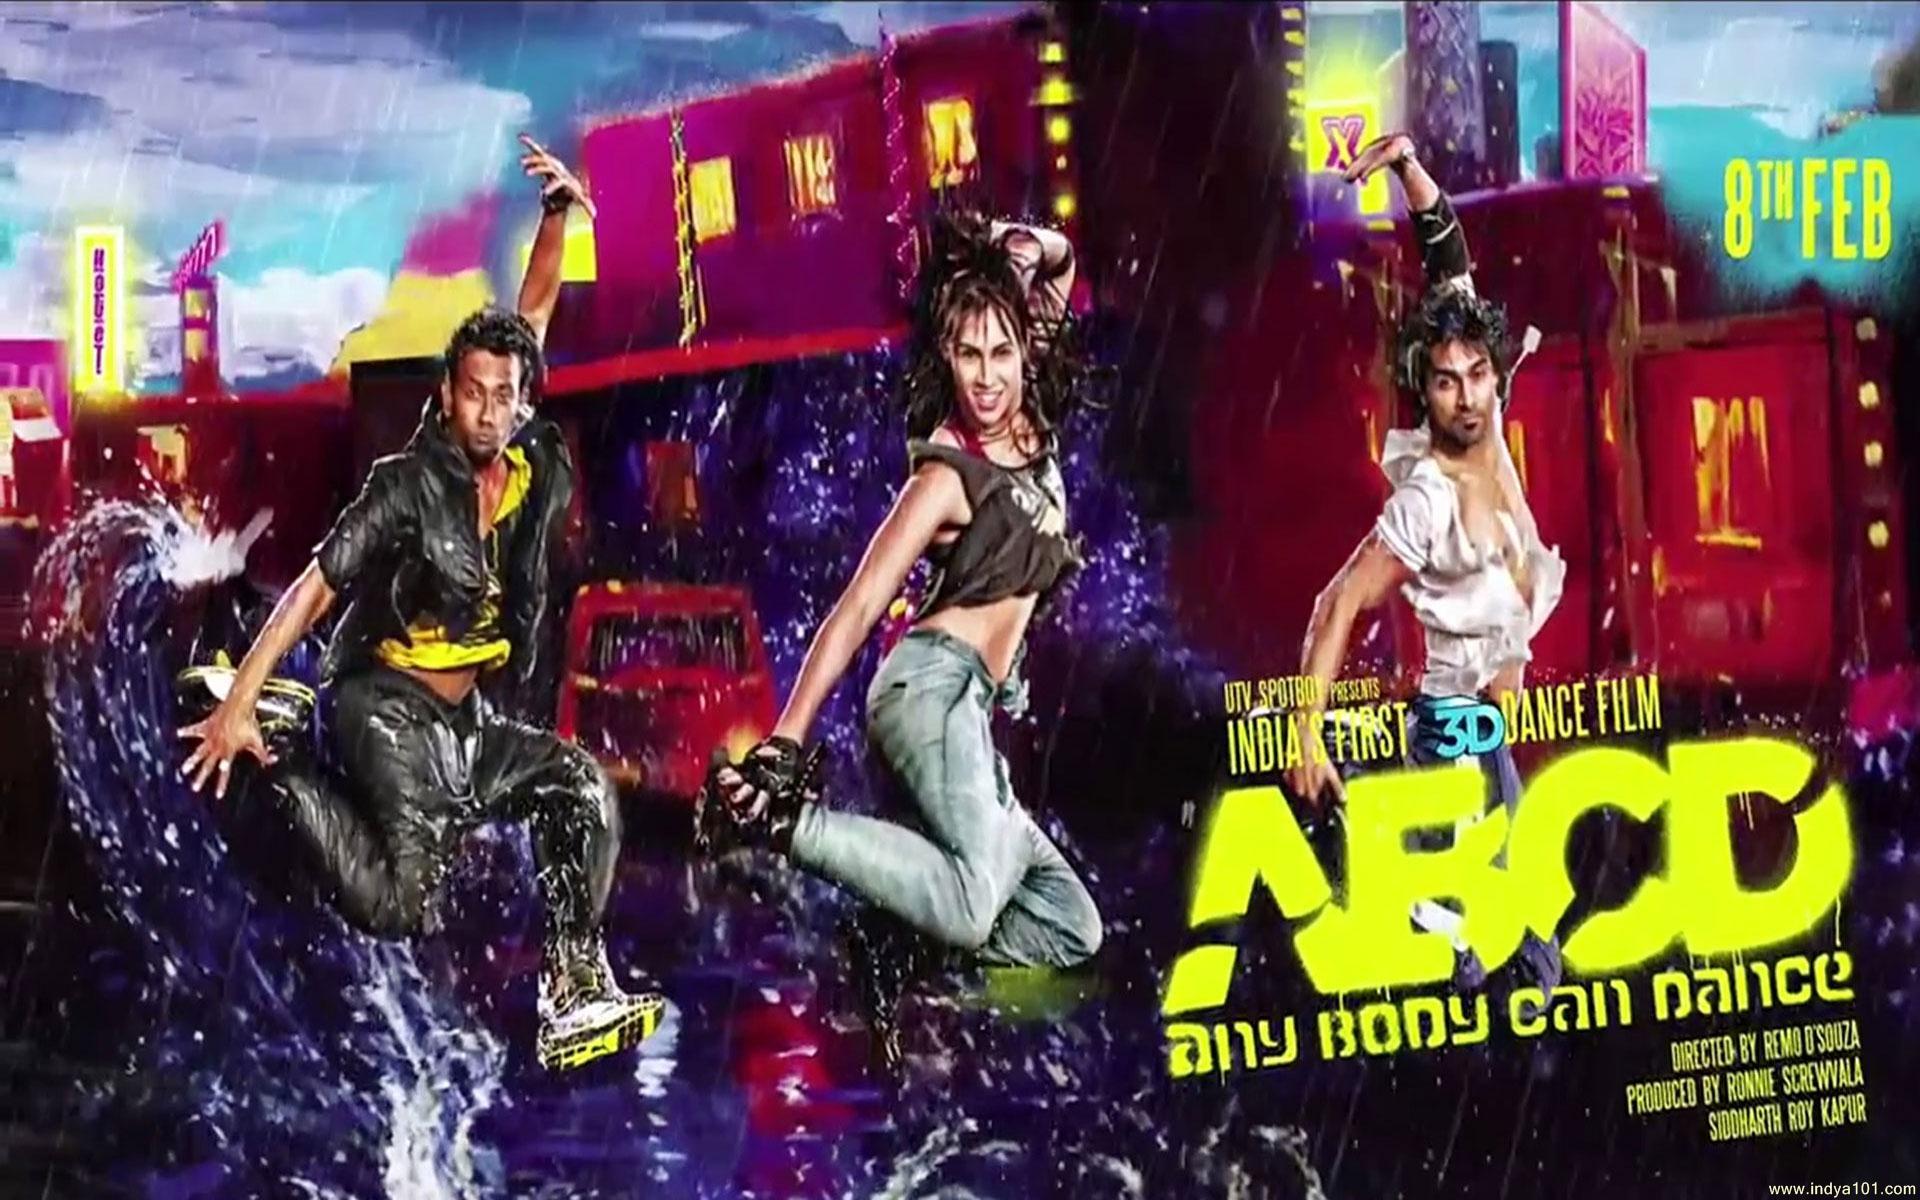 ABCD Body Can Dance movie wallpaper wallpaper